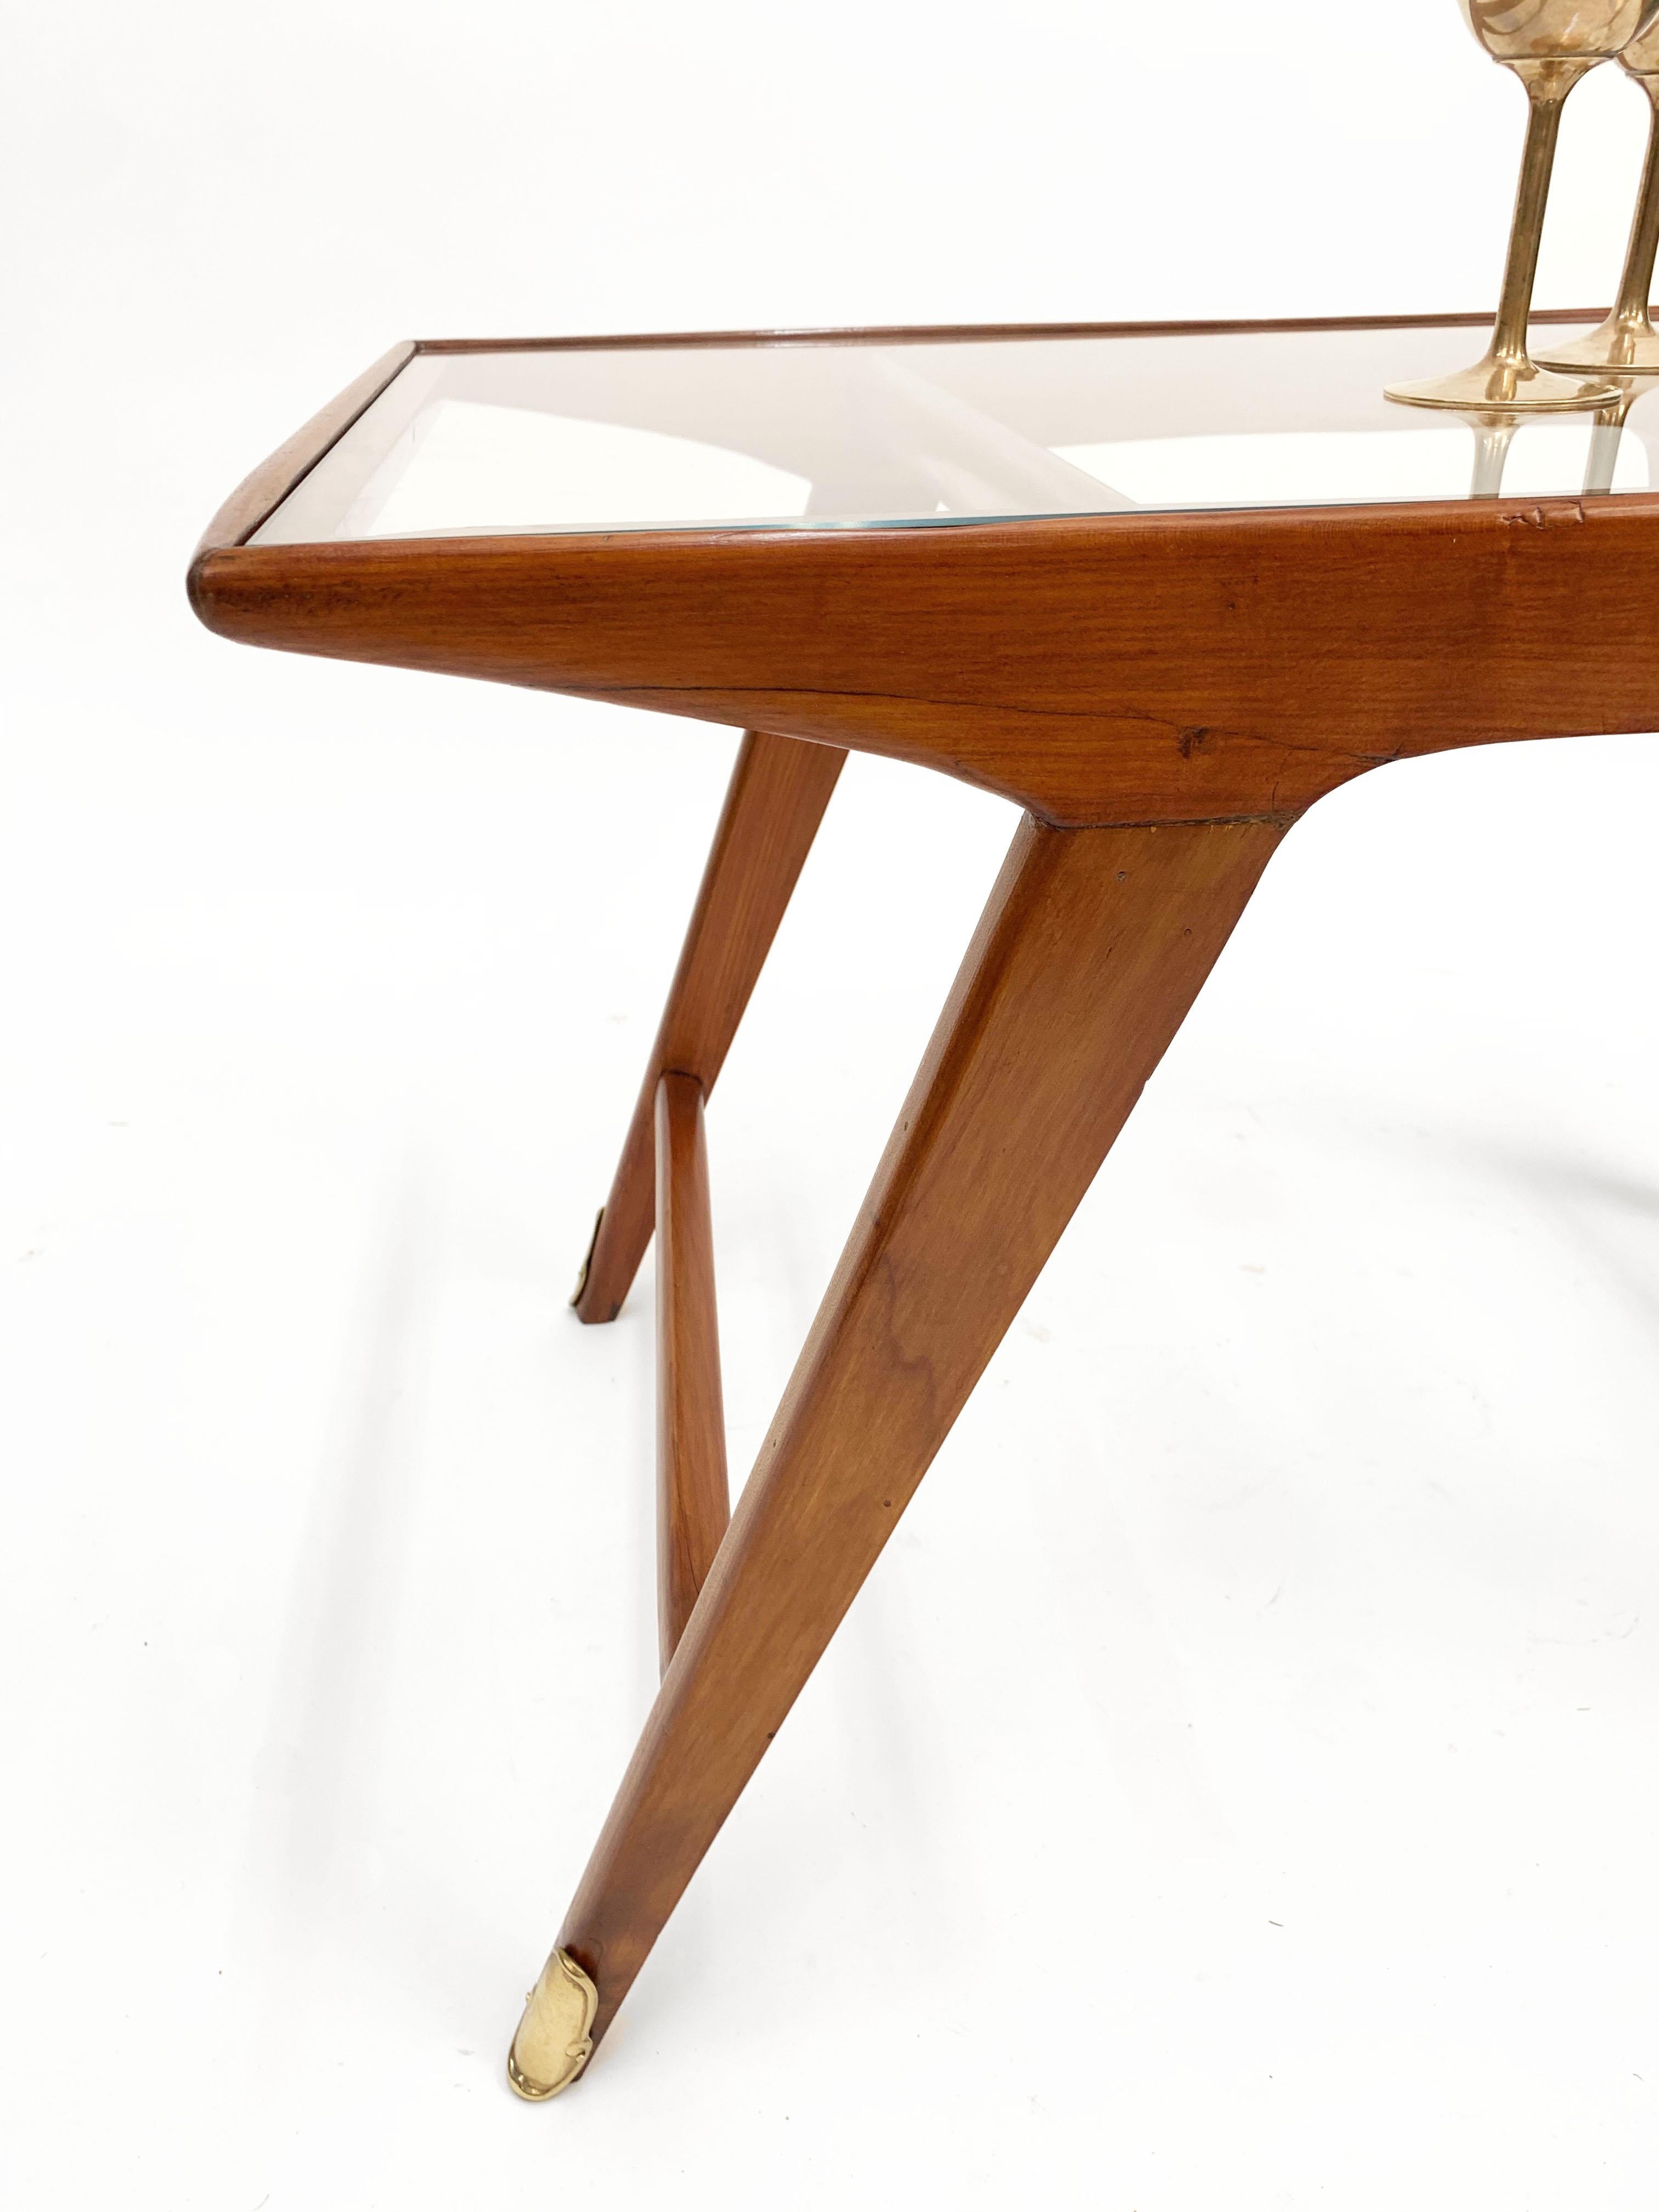 20th Century Cesare Lacca Midcentury Italian Cherrywood and Brass Coffee Table, 1950s